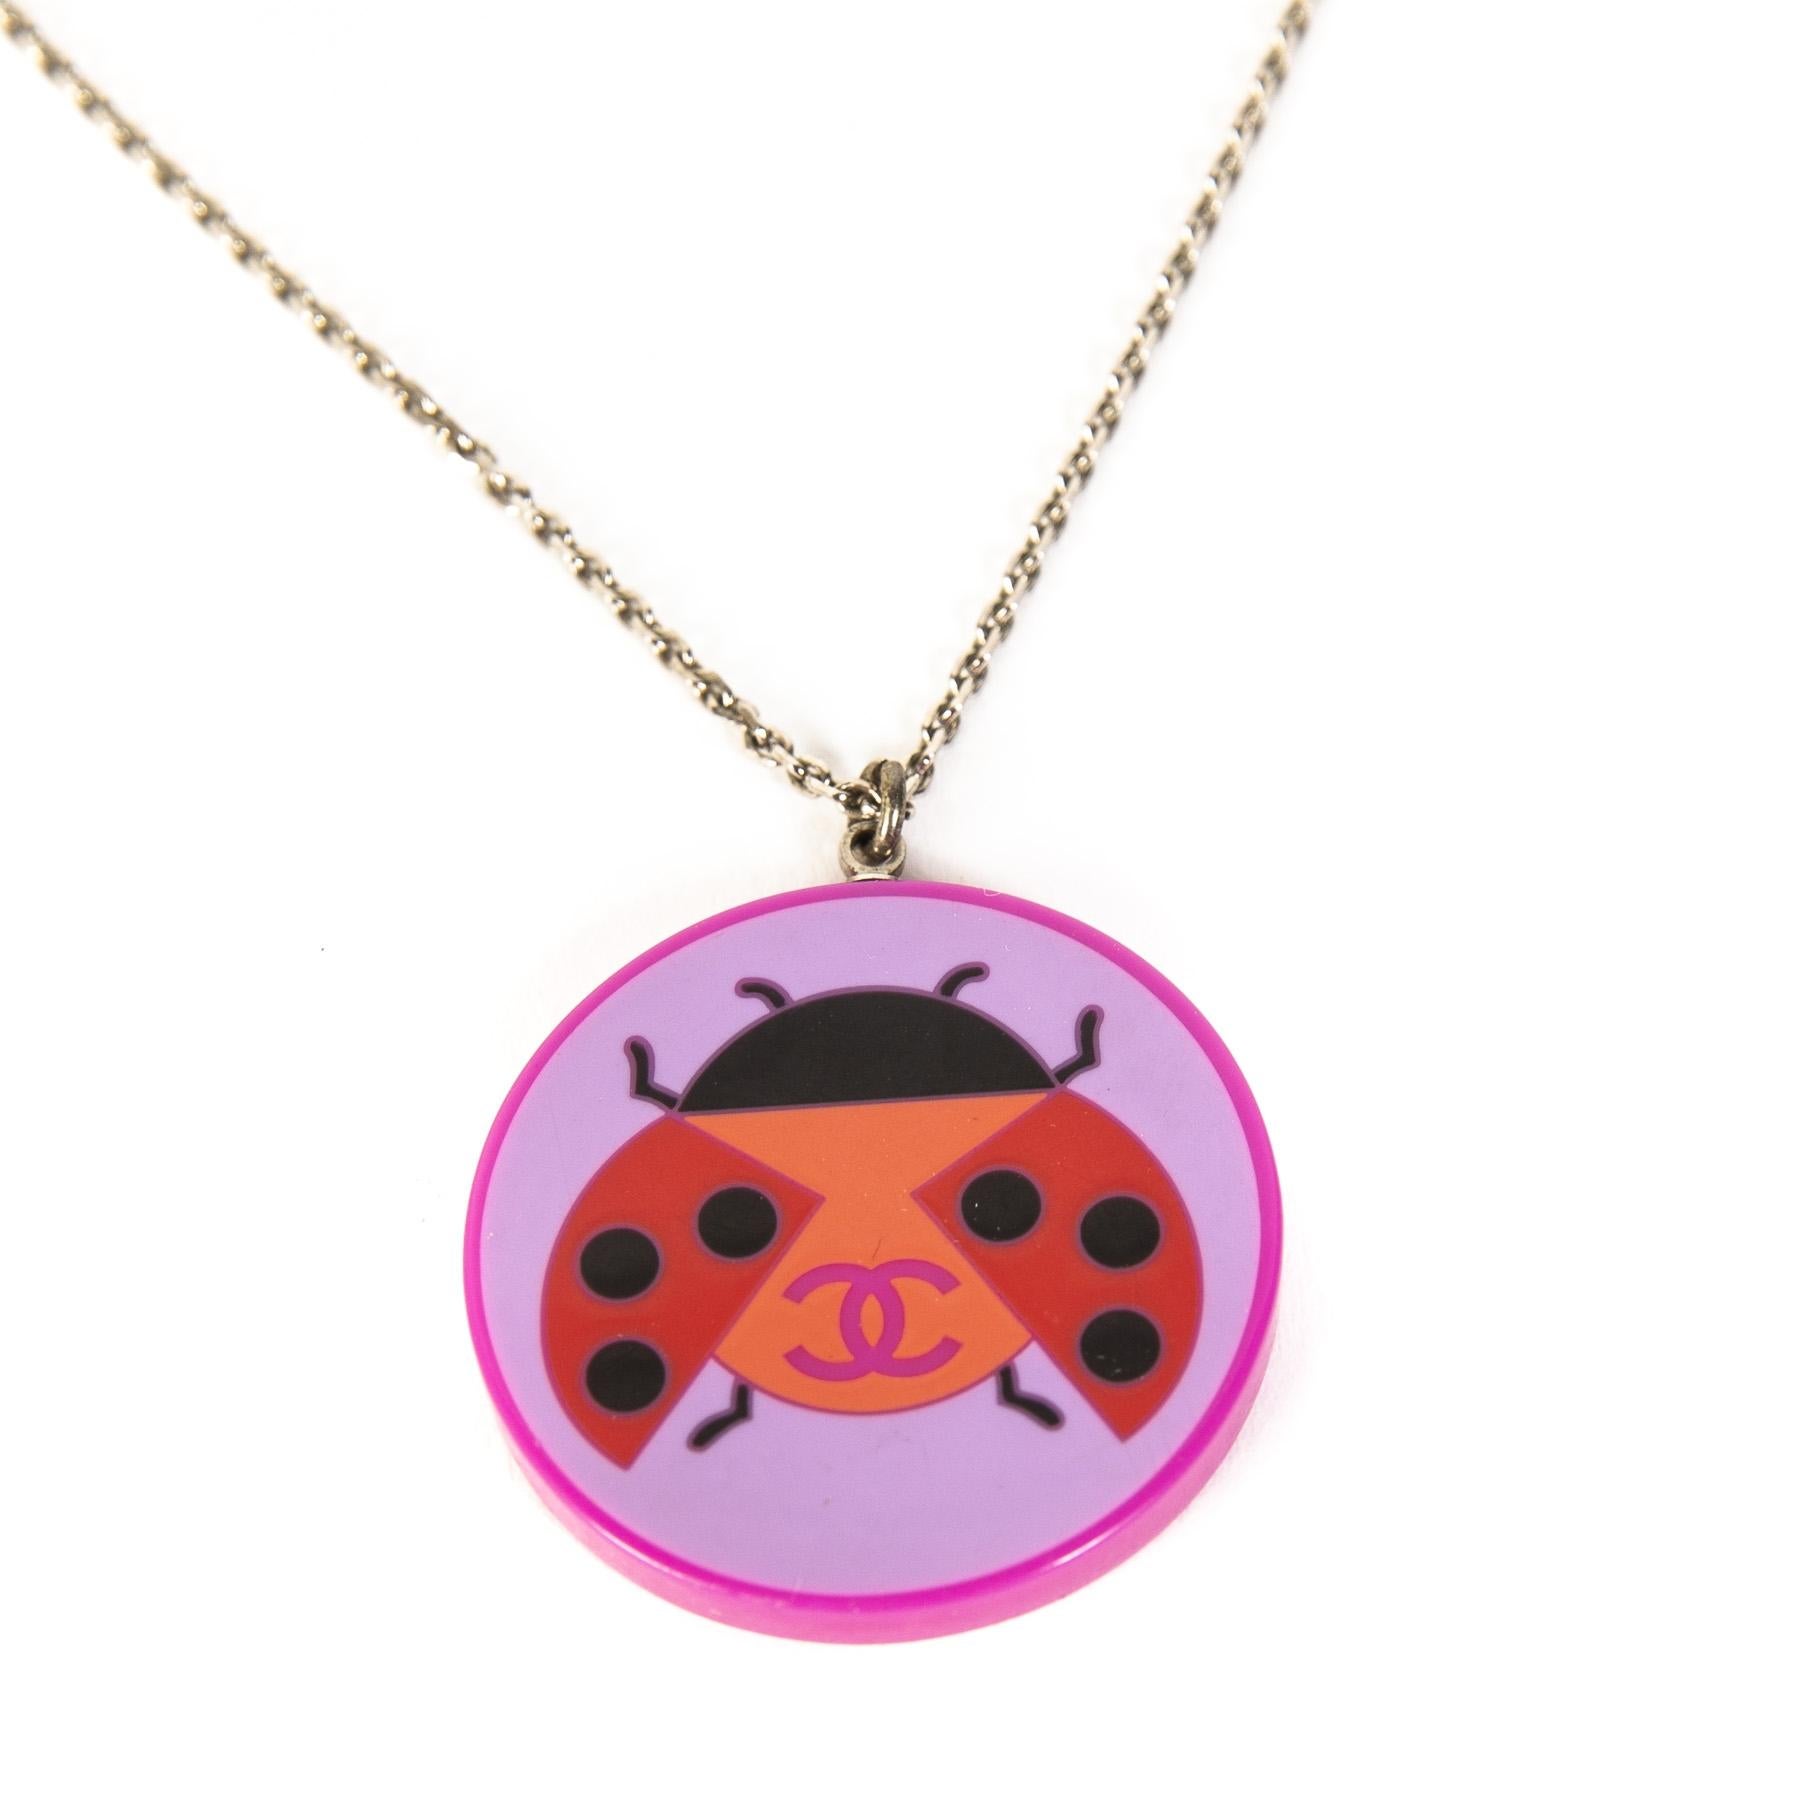 Good preloved condition

Chanel Purple Ladybug Necklace

Oh happy day! This necklace by Chanel will make you instantly happy and cheerful. 

The purple color and ladybug make this necklace extra playful and will make sure you are ready for summer.